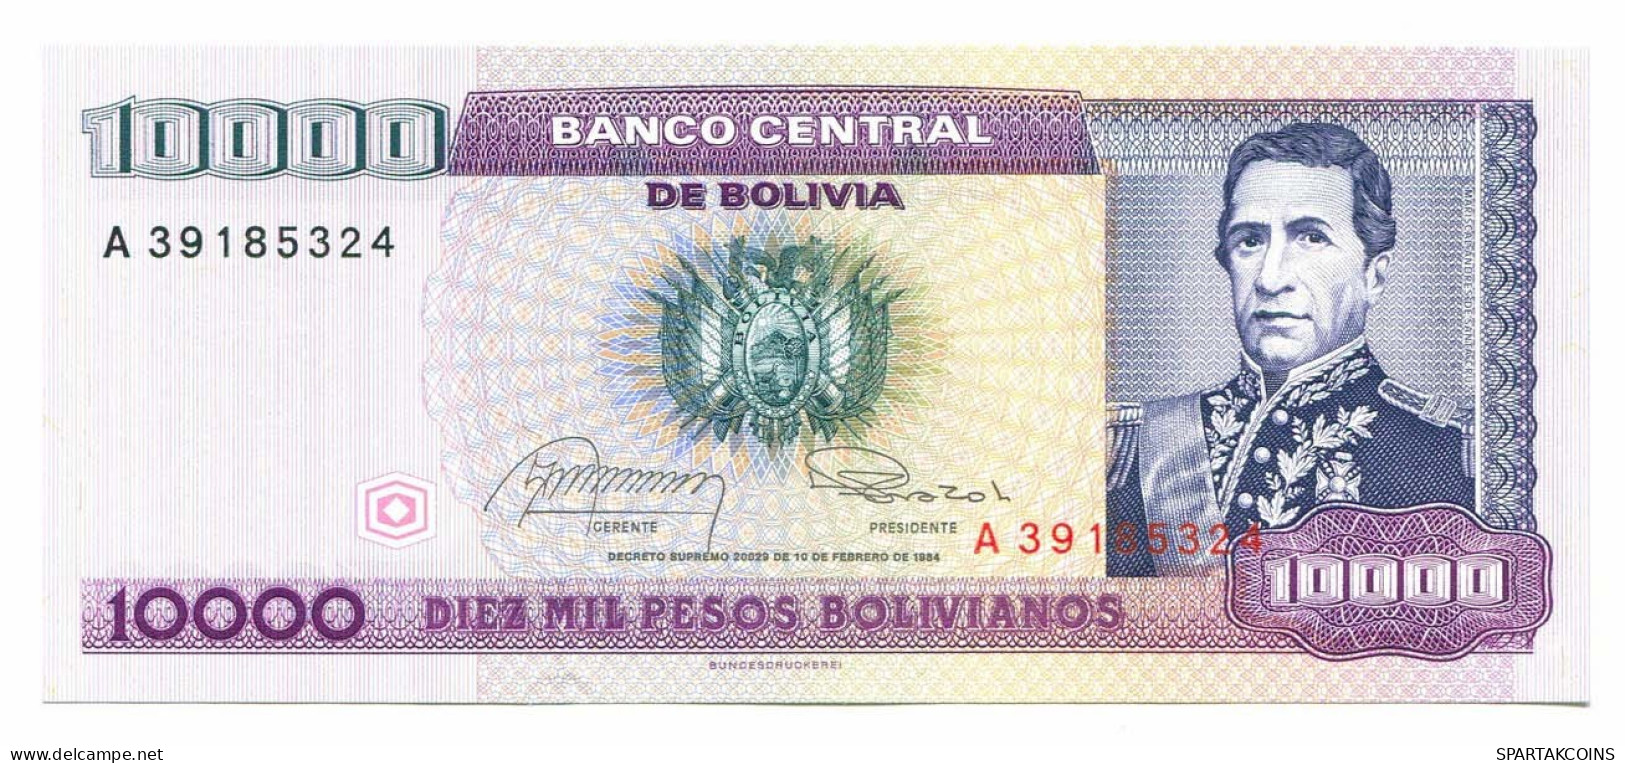 BOLIVIA 10 000 PESOS BOLIVIANOS 1984 AUNC Paper Money Banknote #P10814.4 - [11] Local Banknote Issues